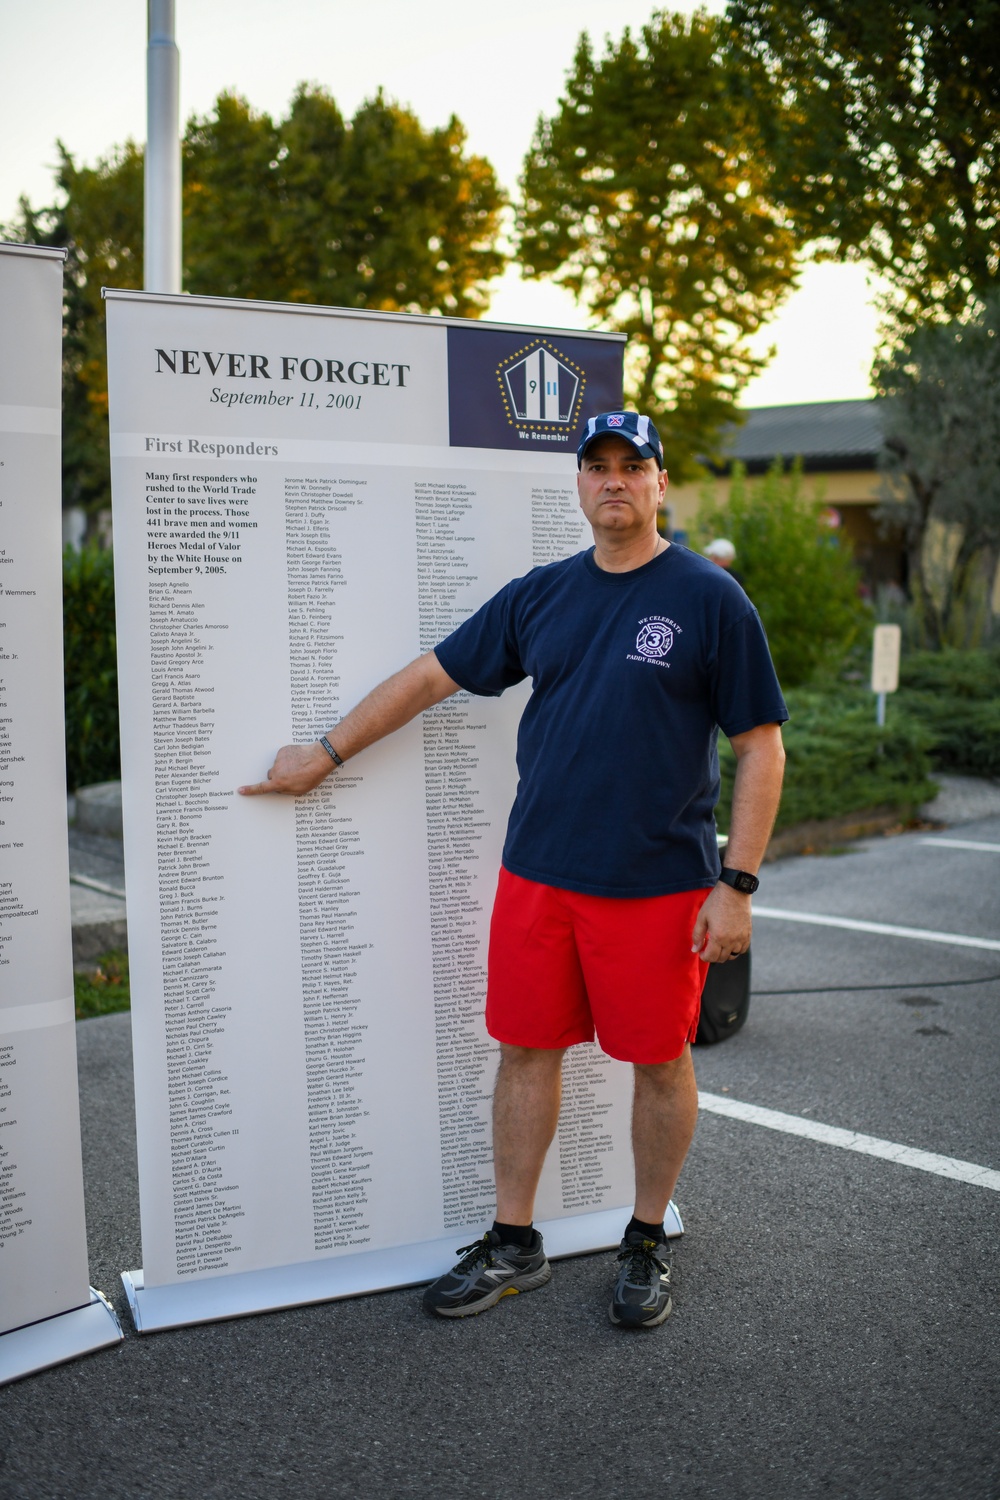 USAG Italy Commemorates 20 Years After 9/11